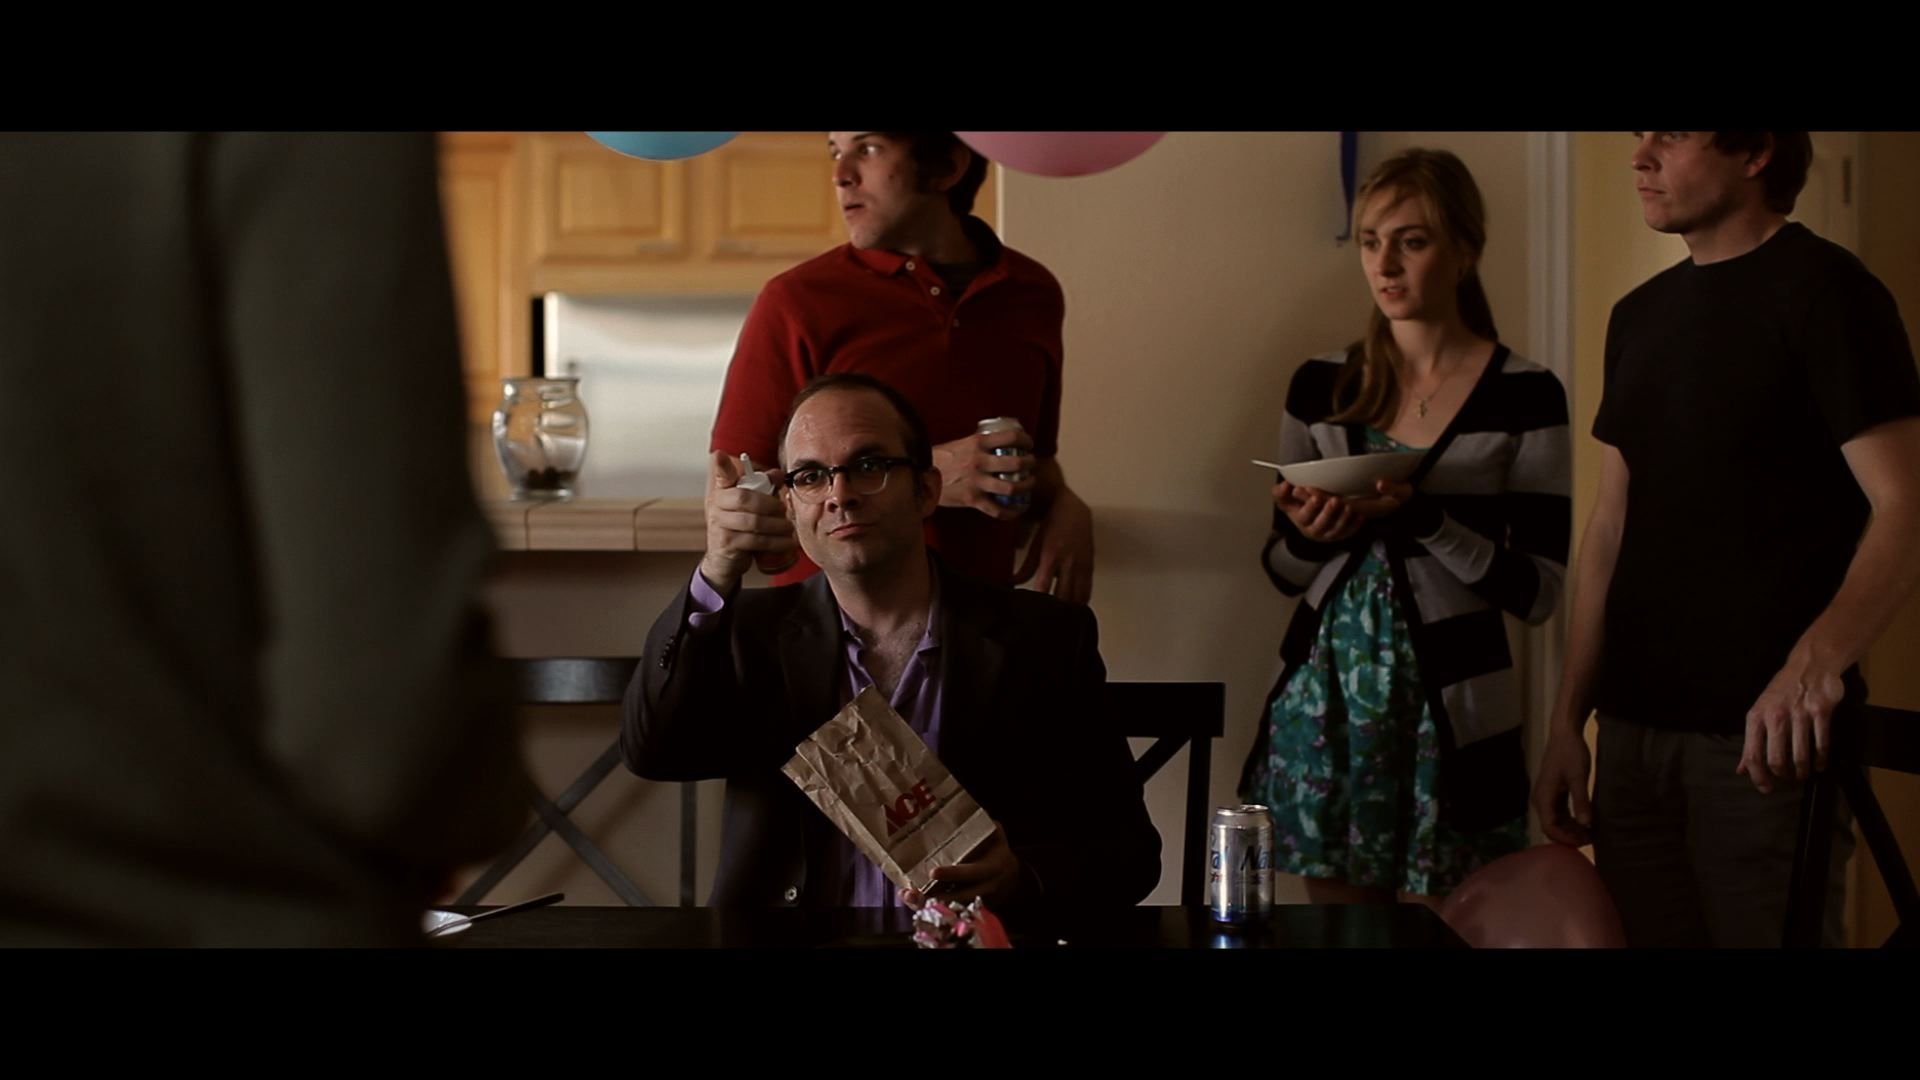 Will Hines toasting a birthday wish to Michael Cera. Bad Dads (2010). Directed by Derek Westerman